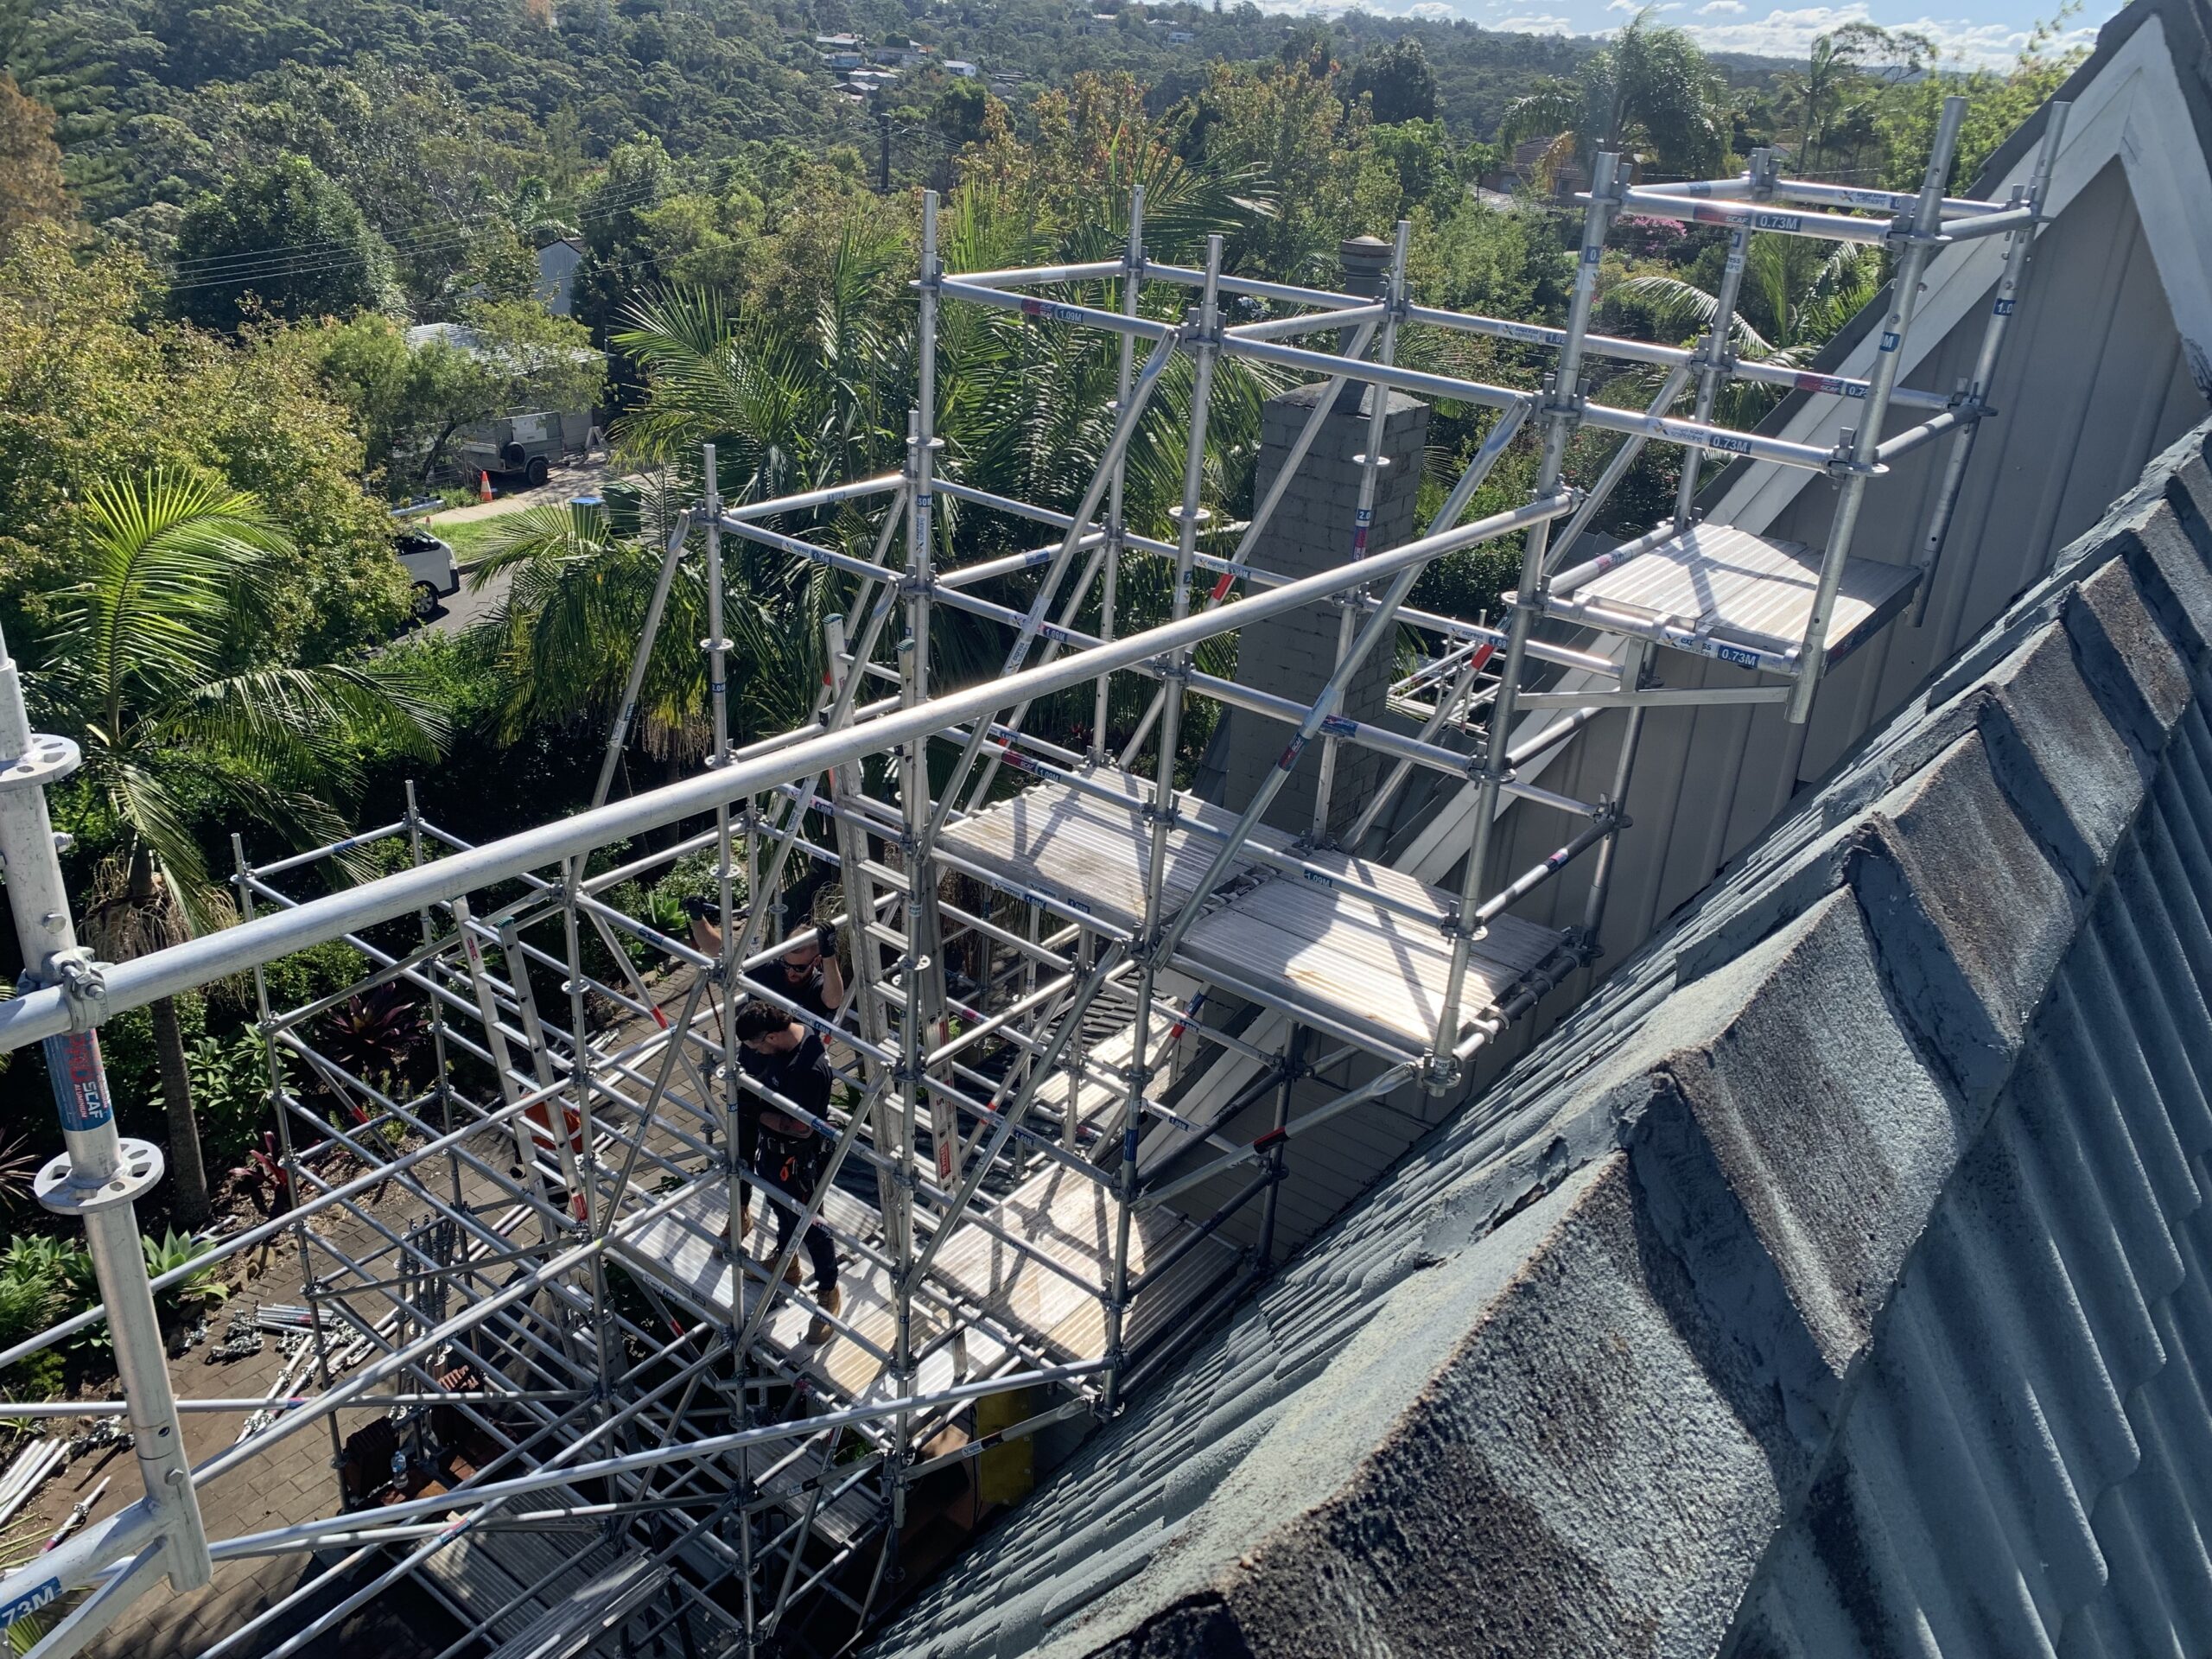 Aluminium scaffold by Express Scaffolding in East Killara Sydney built on a 60 degree angle residential roof